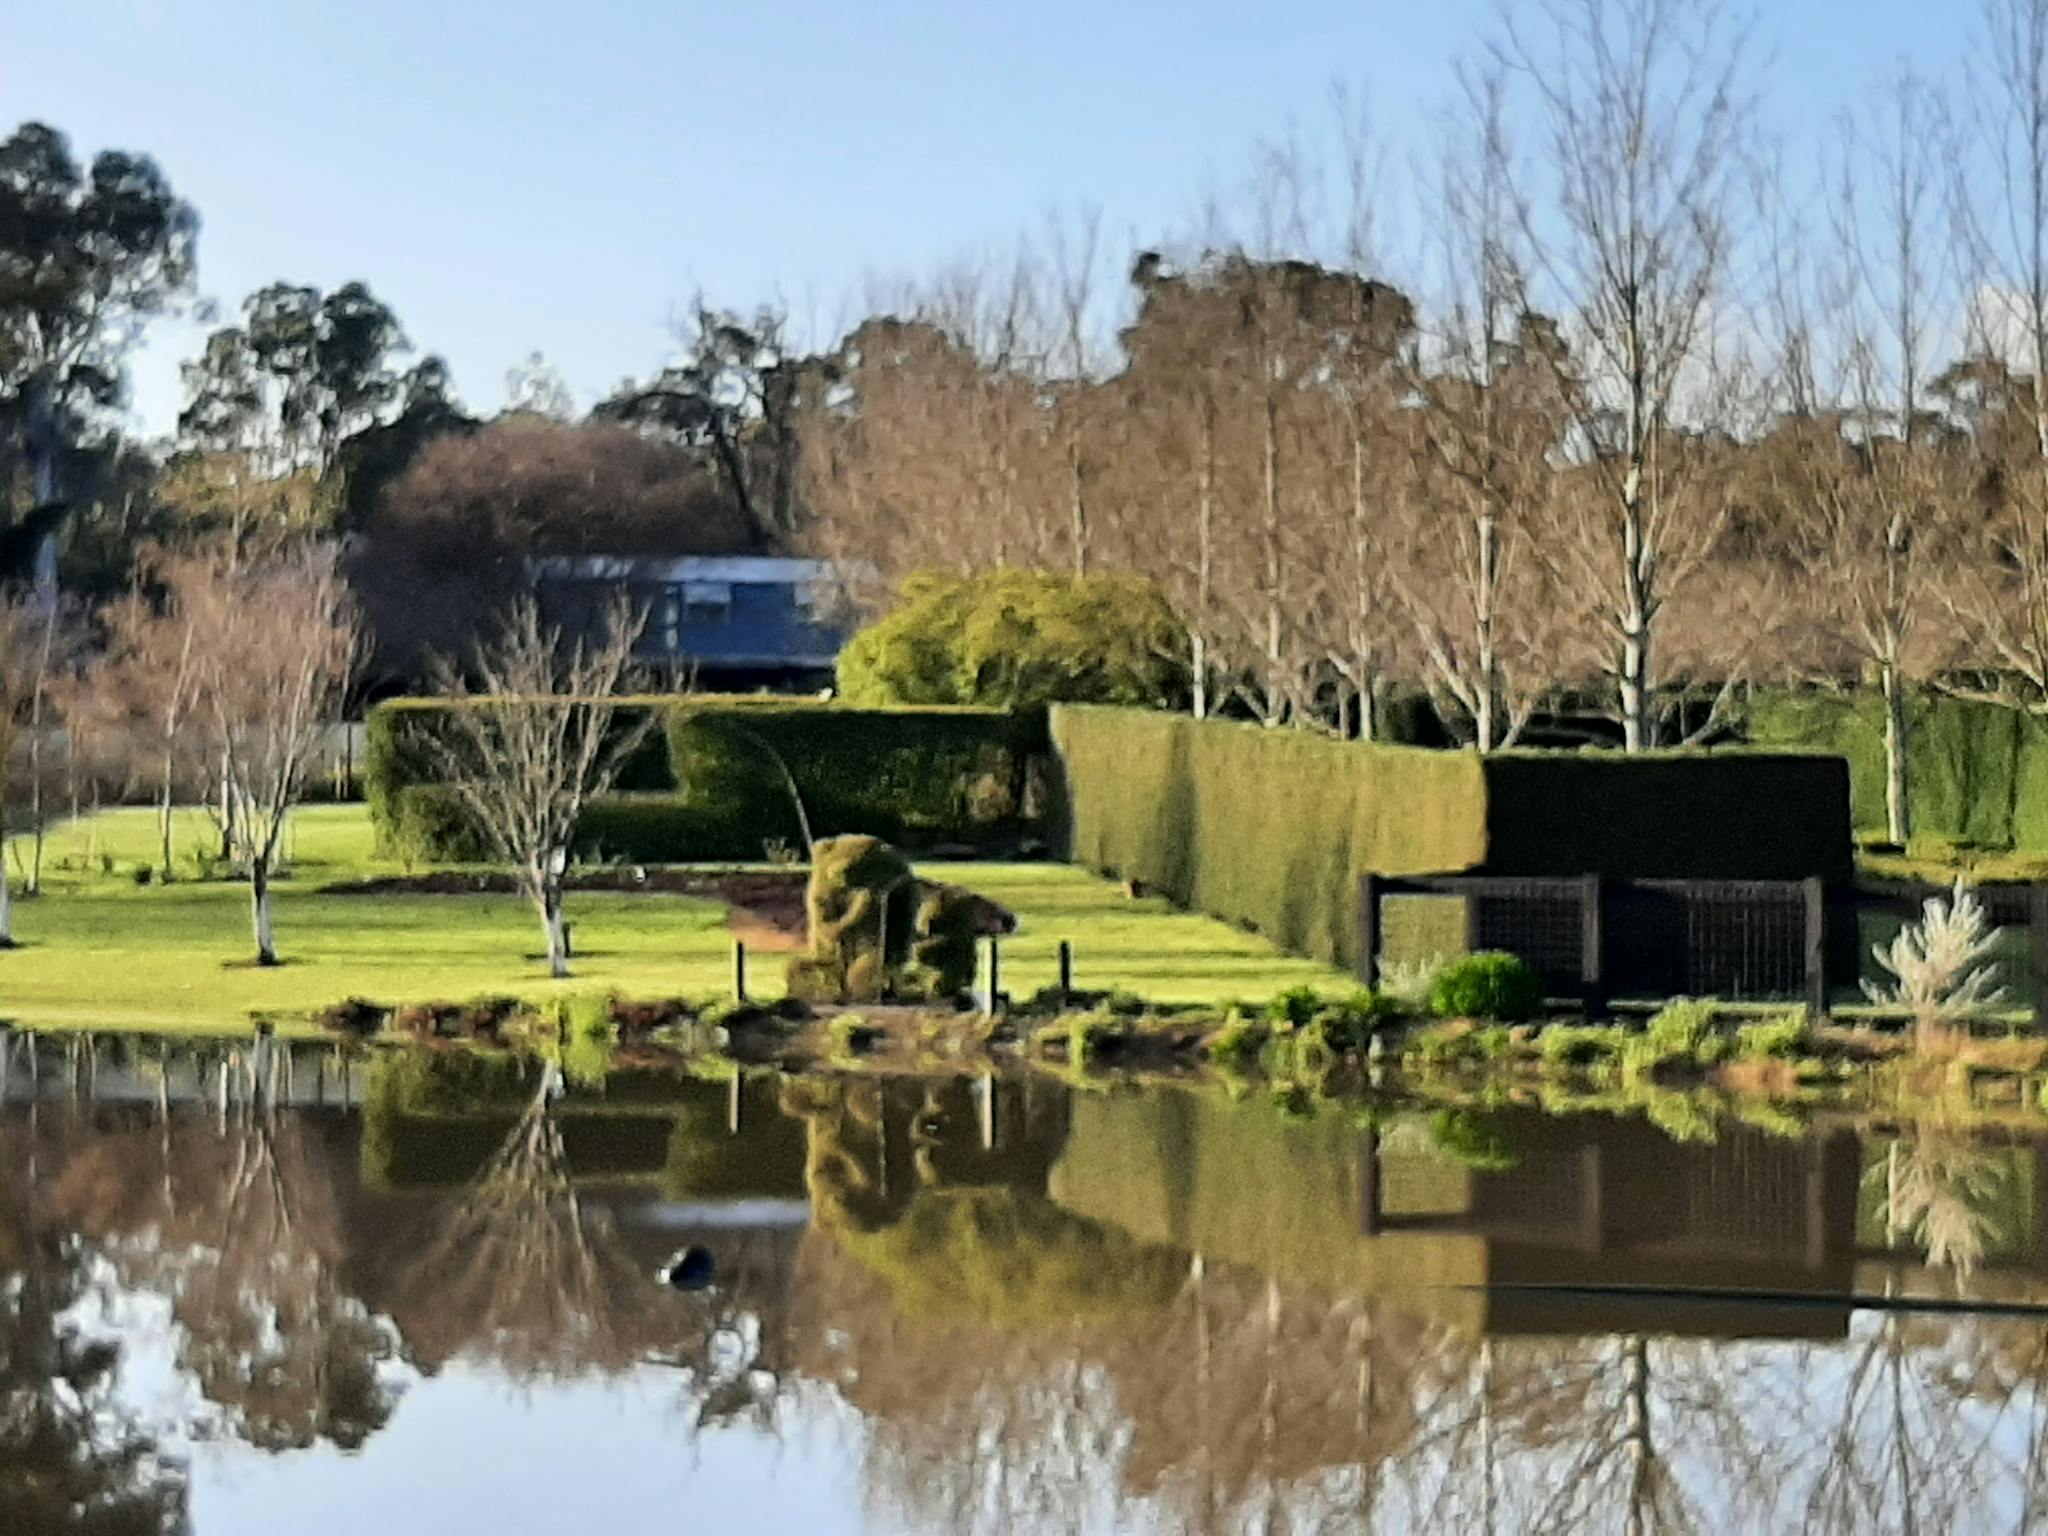 Dam and topiaries in winter